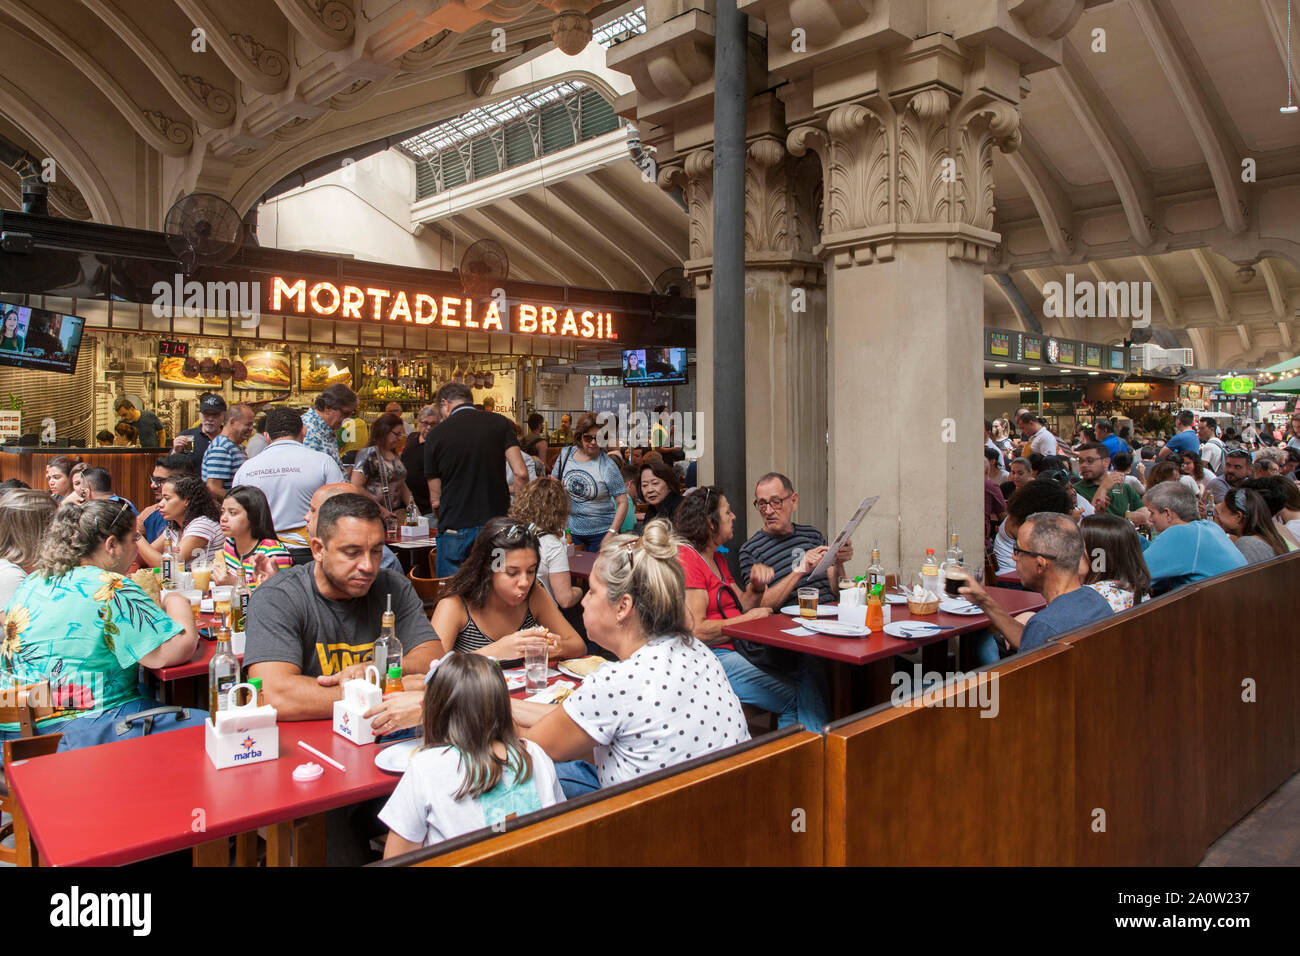 People eating at a restaurant in the São Paulo municipal market in São Paulo, Brazil. Stock Photo